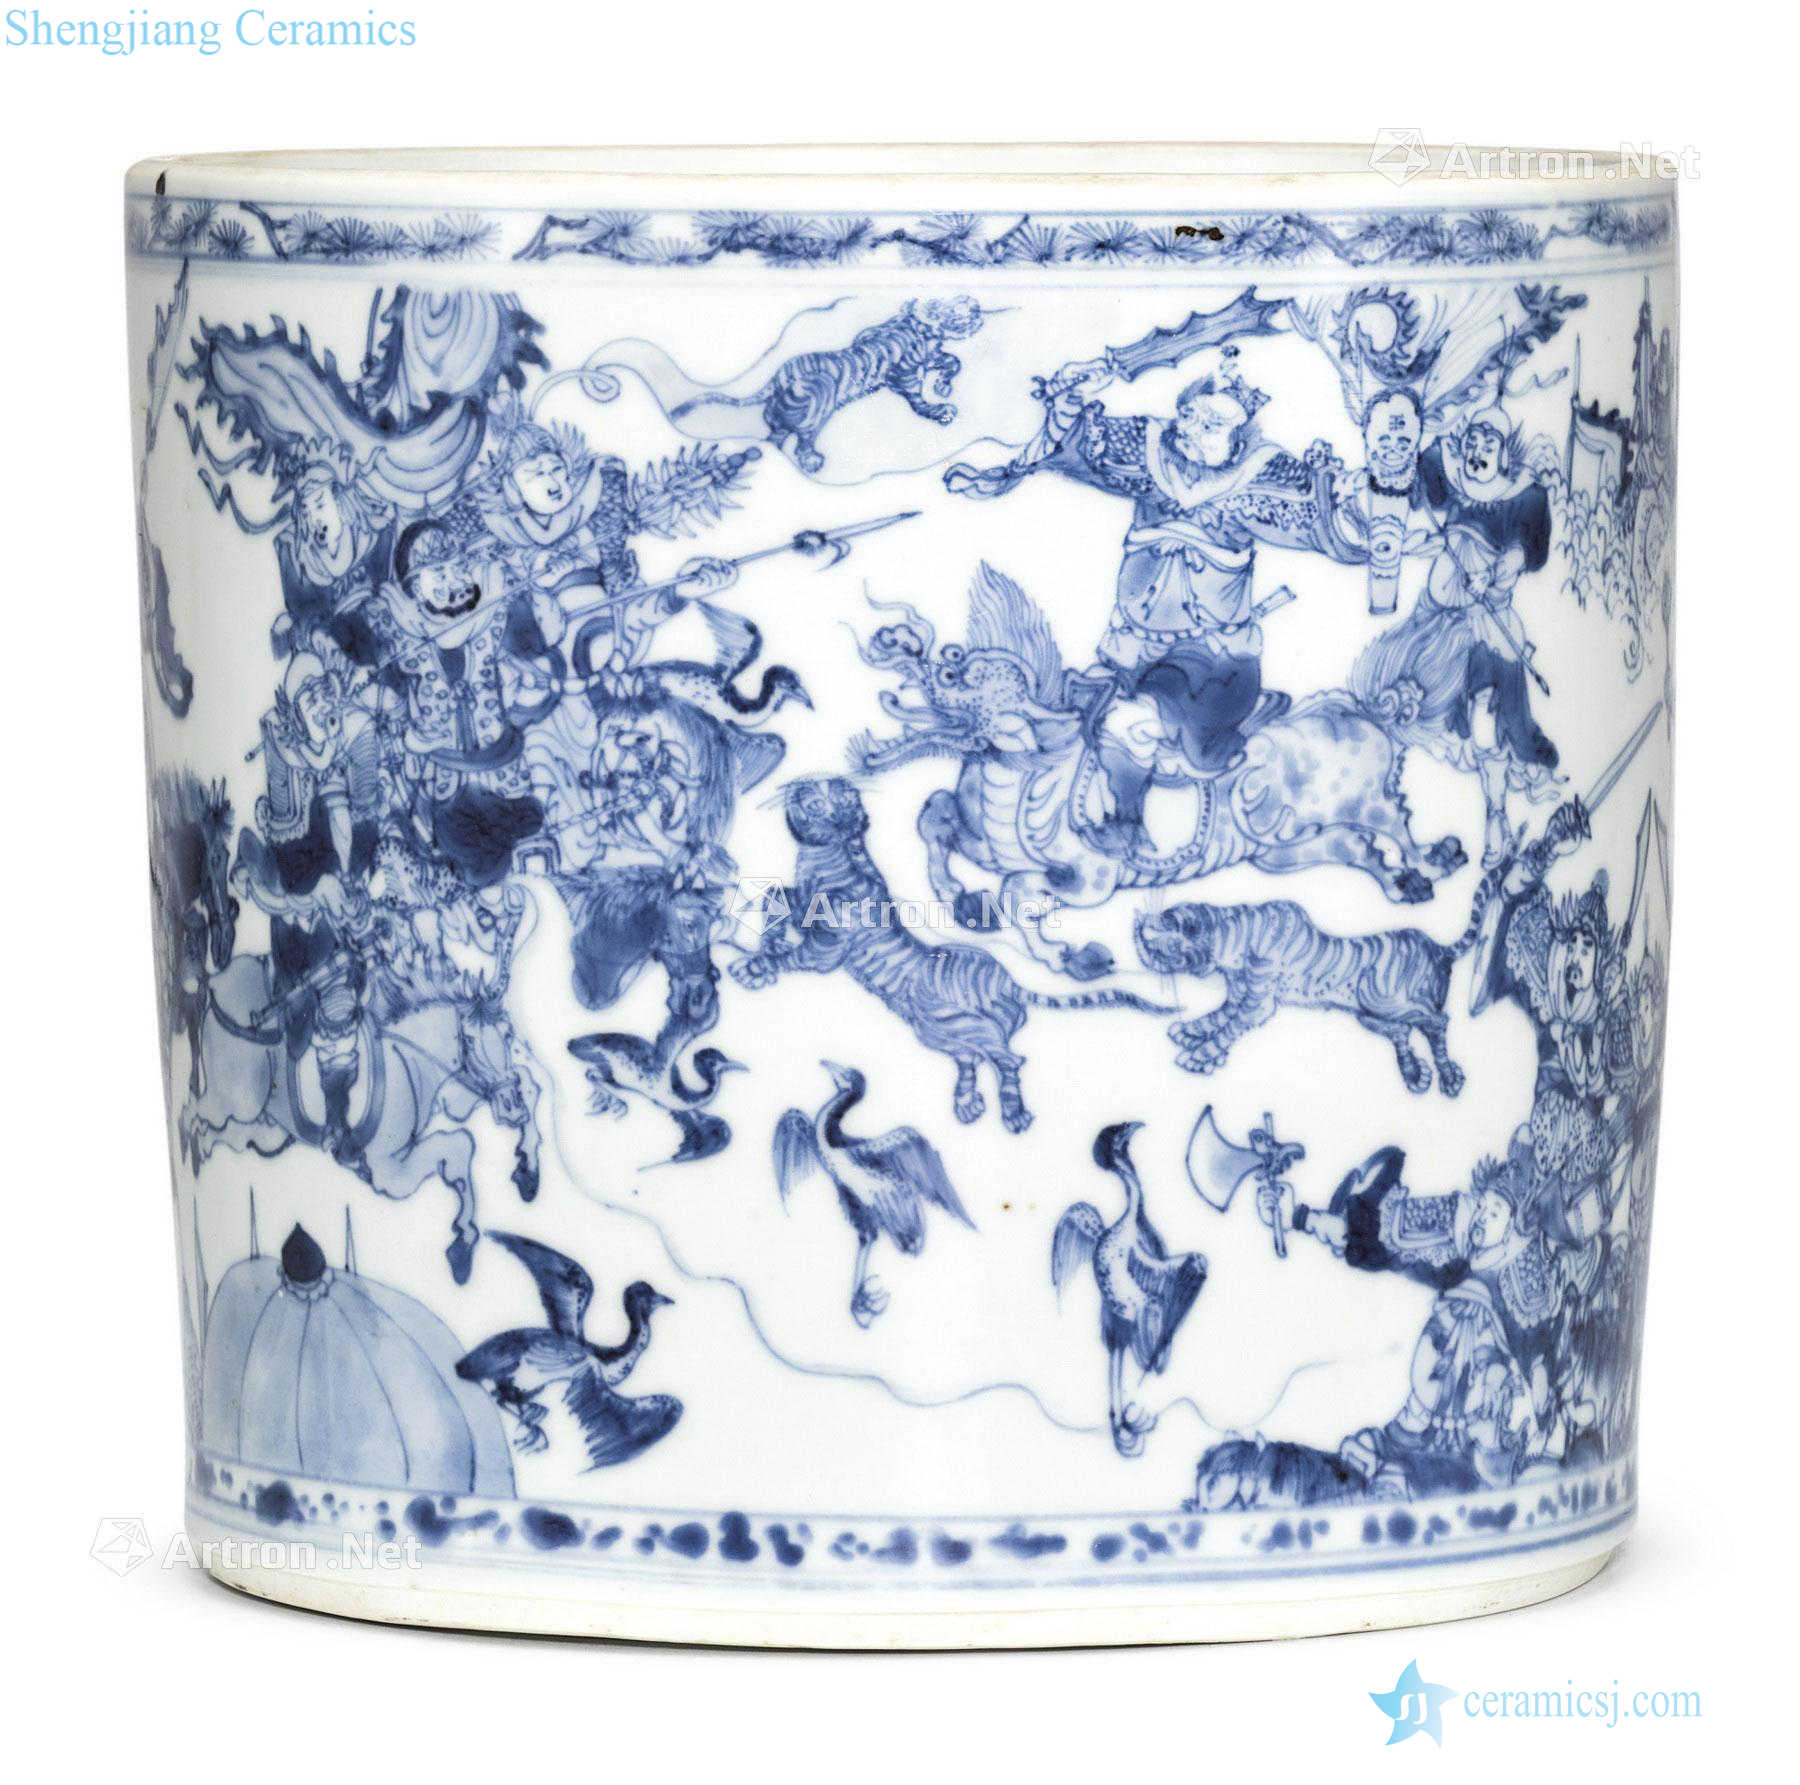 The late Ming dynasty Blue and white soul hunter figure pen container